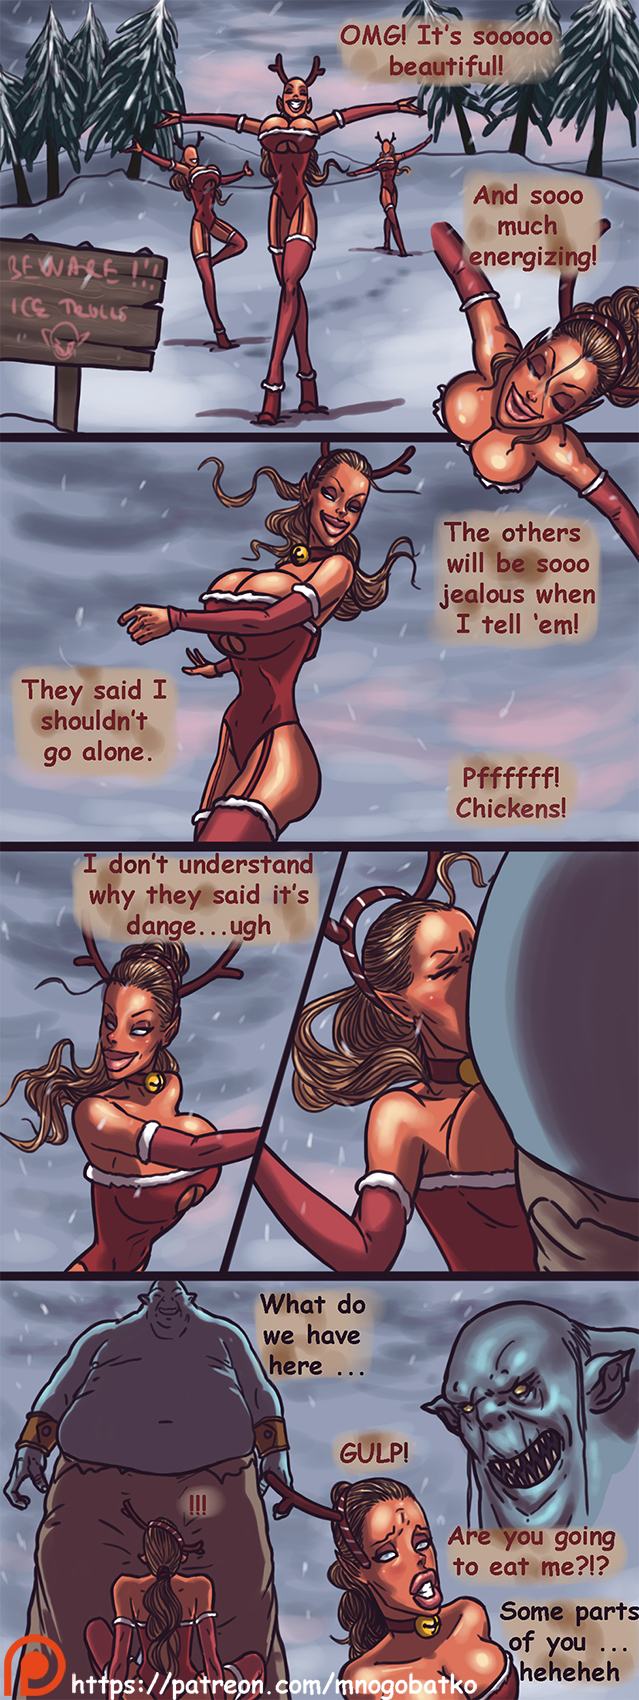 Updated threesome comic by Mnogobatko Winter Tale Ongoing Porn Comics